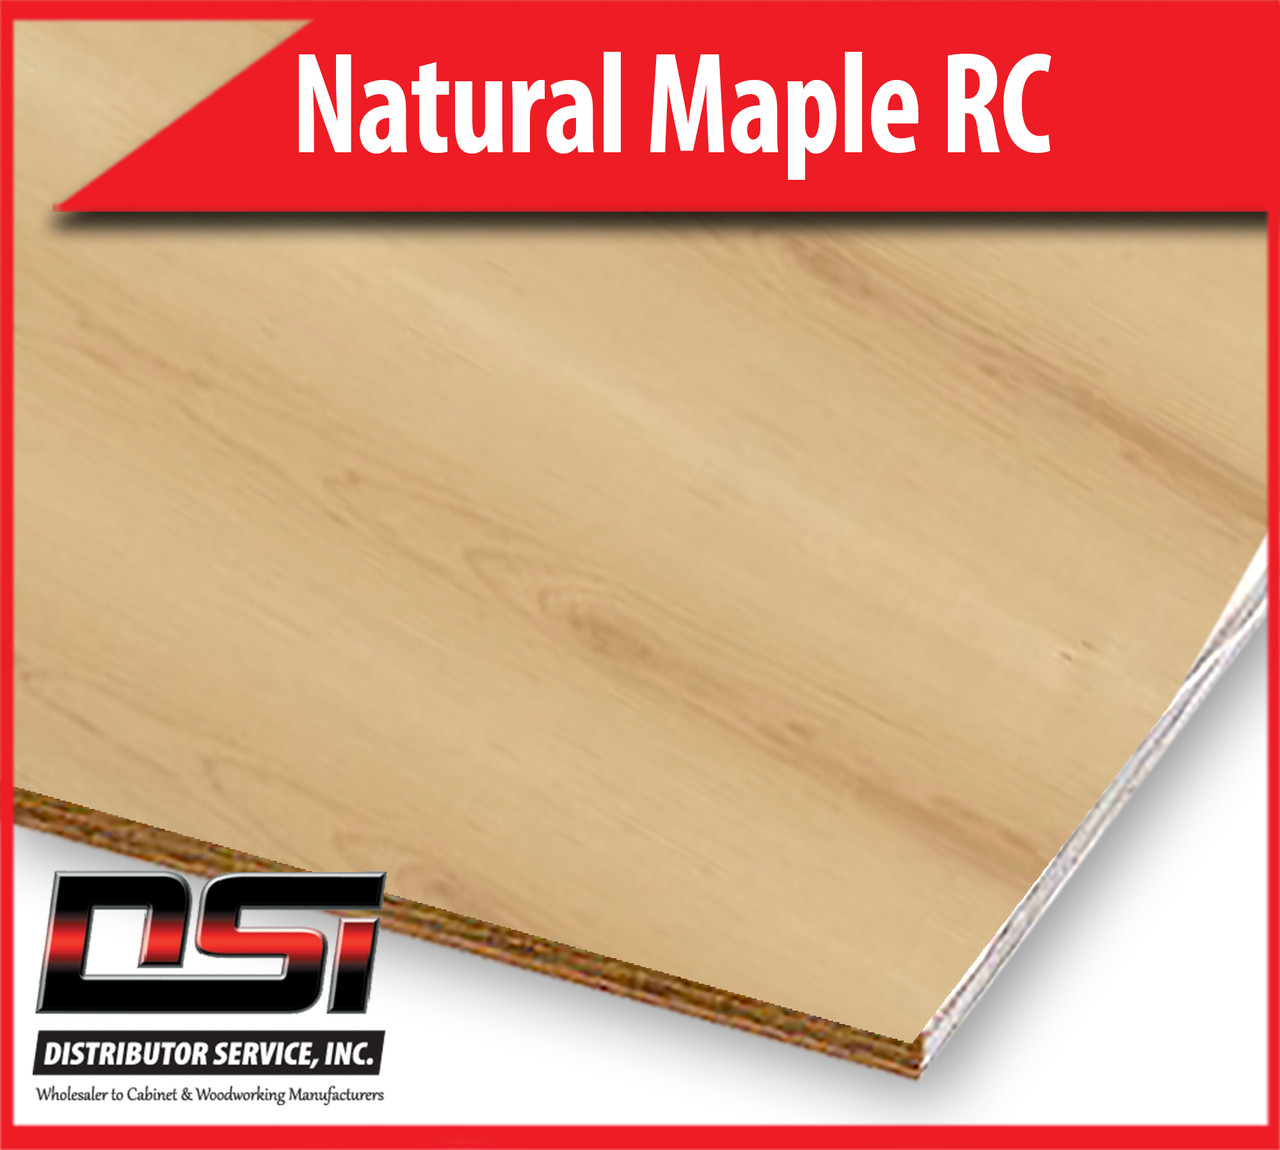 Natural Maple Plywood WPF VC A1 Spliced RC Back 3/4" x 4x8 CFP